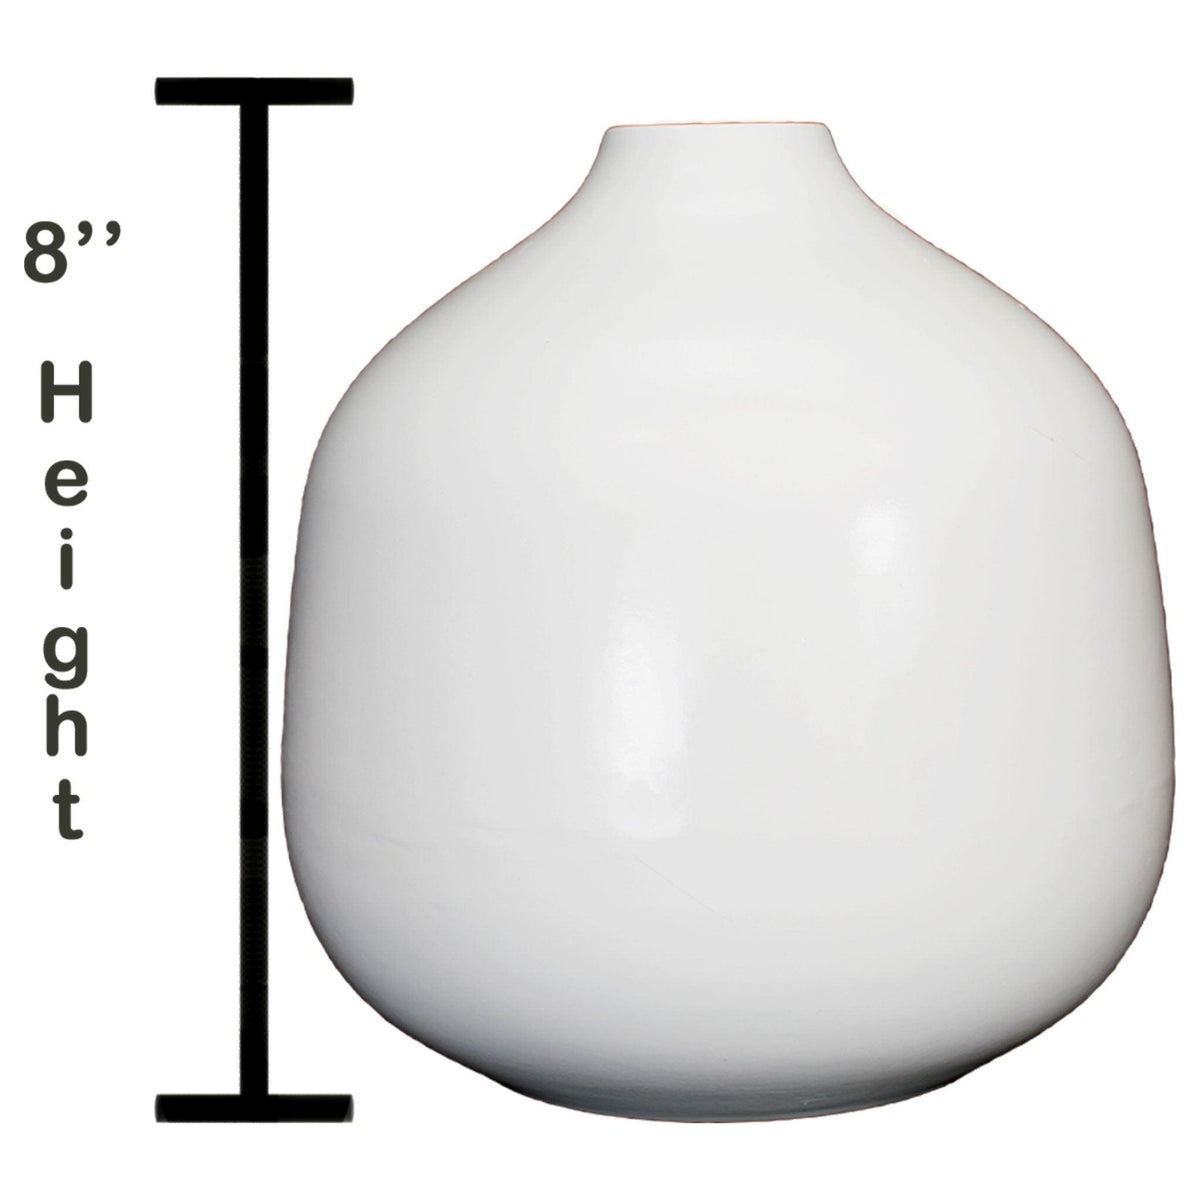 Lee Display's brand new 8in Bell Krater Ceramic Vase comes in a high gloss white finish on sale at leedisplay.com